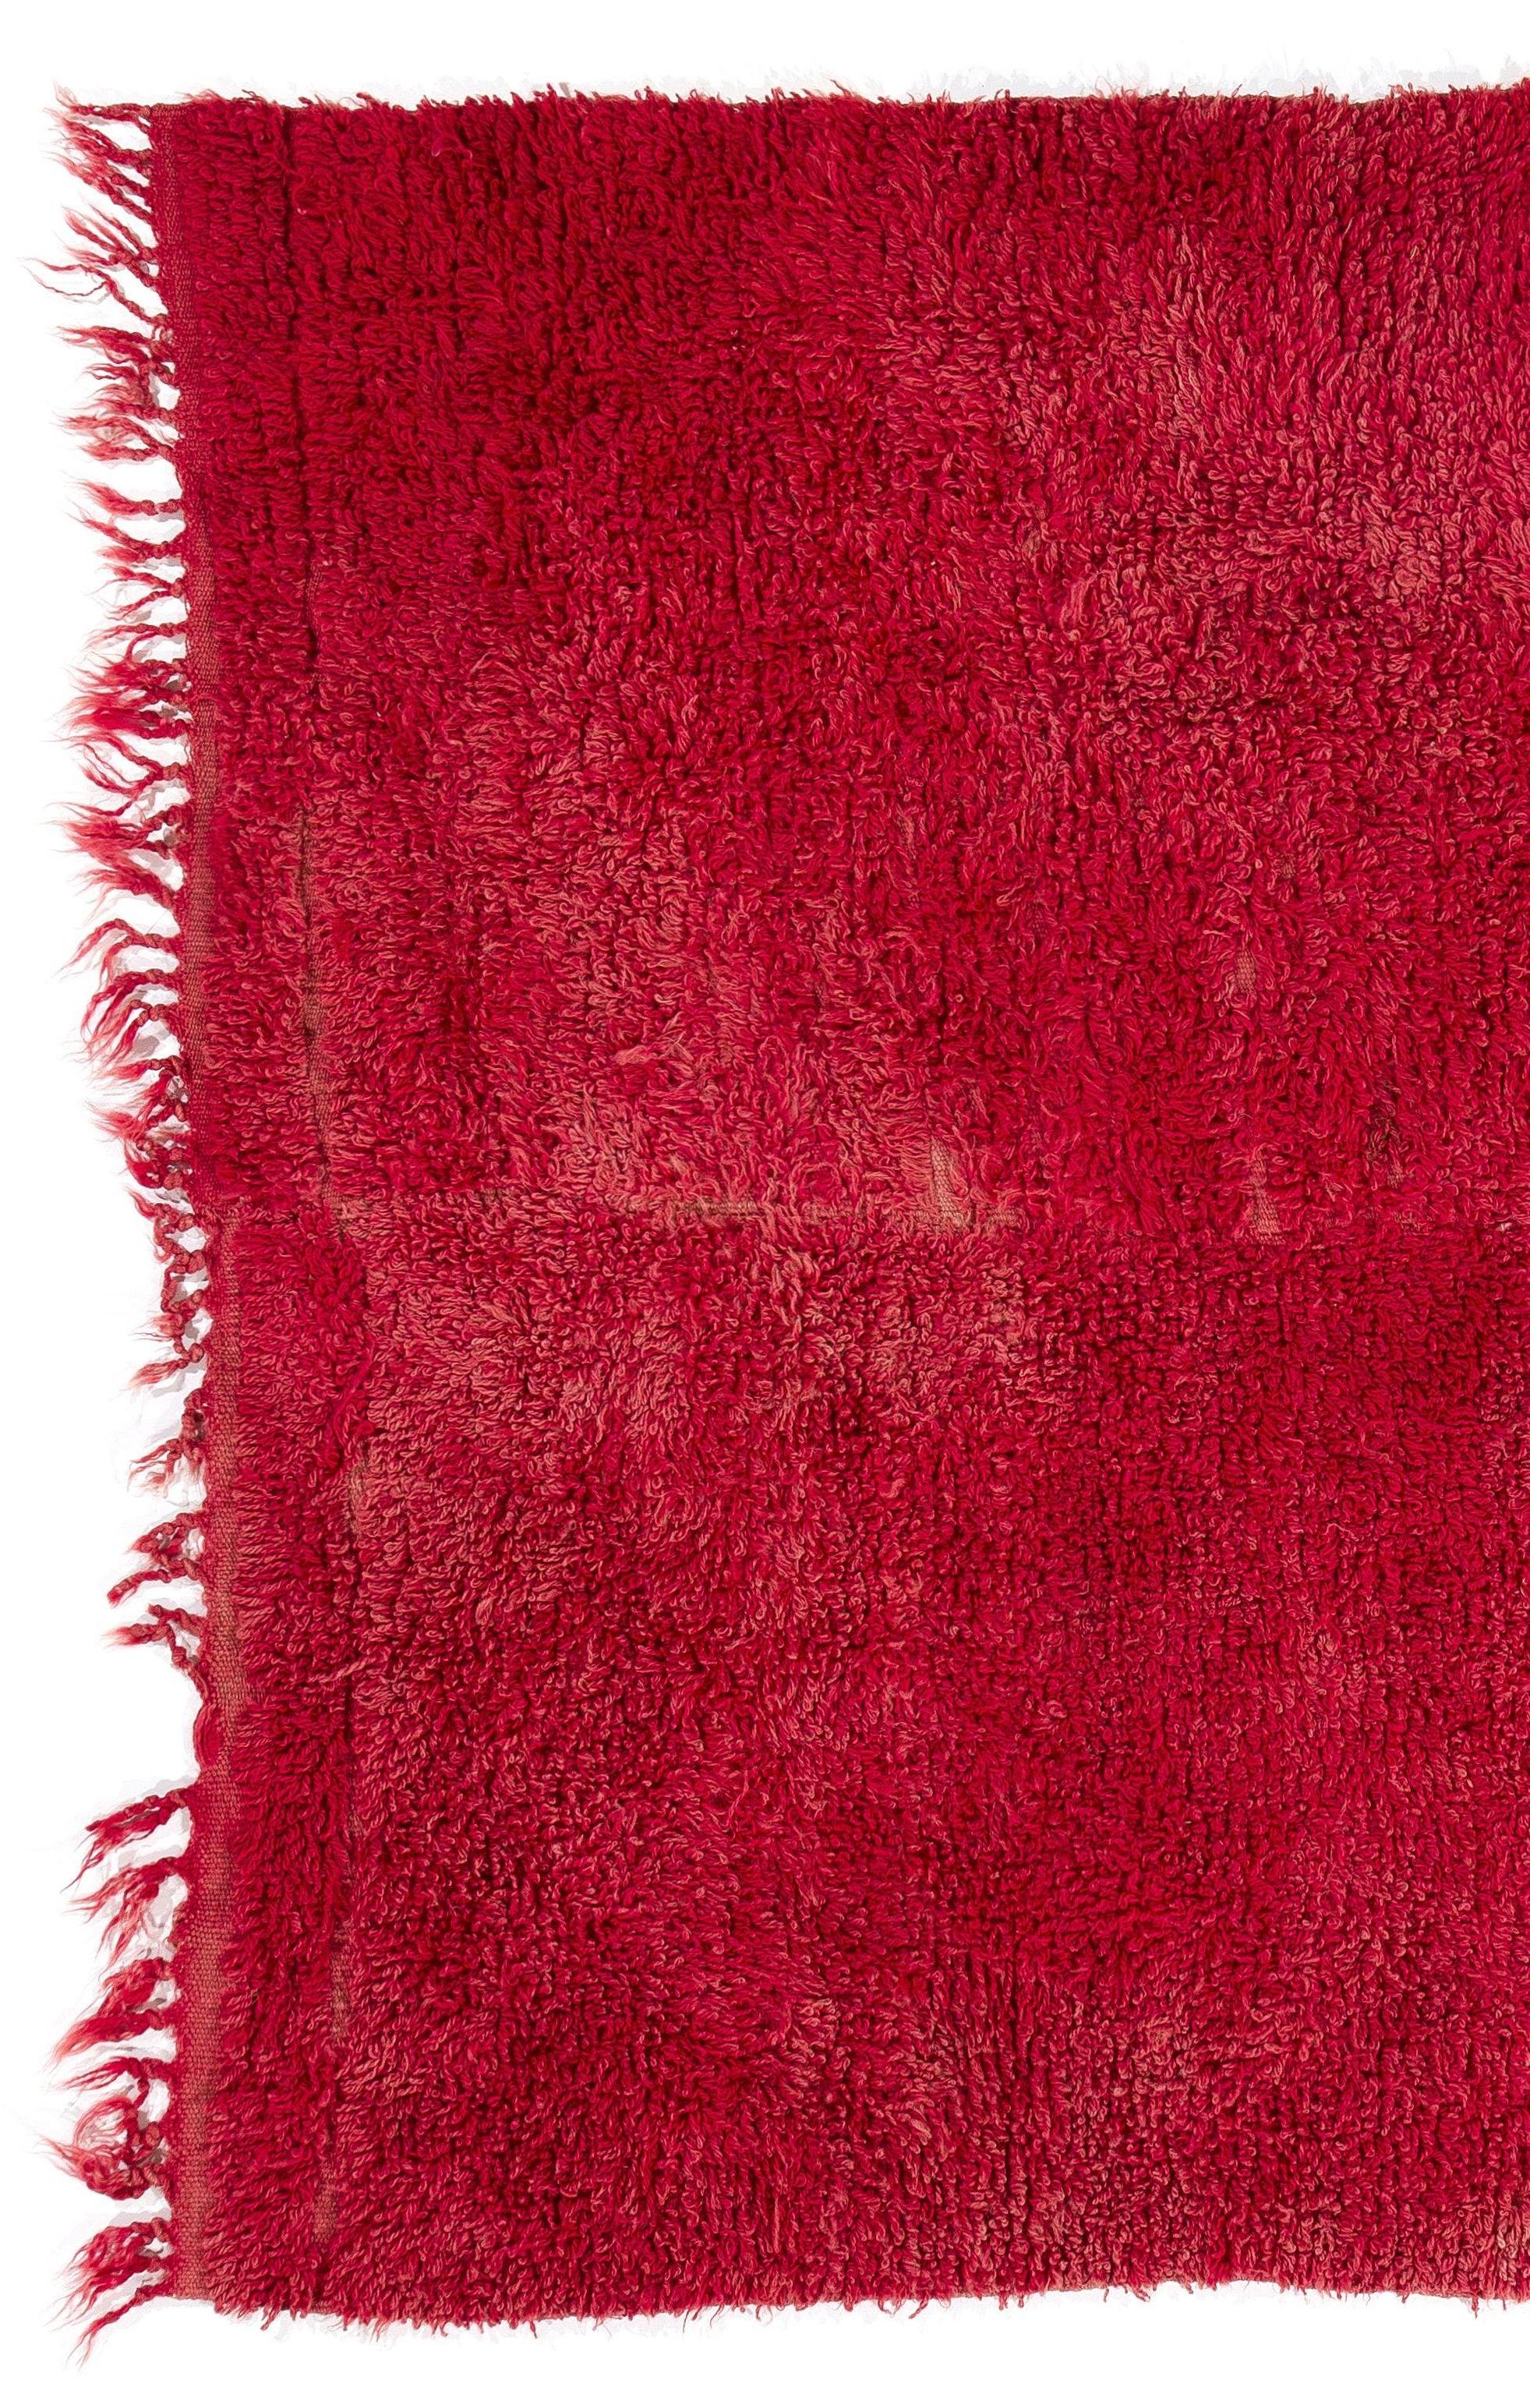 Turkish 4.3x5.3 Ft Plain Solid Red Color Hand-Knotted Vintage Tulu Rug. 100% Soft Wool. For Sale